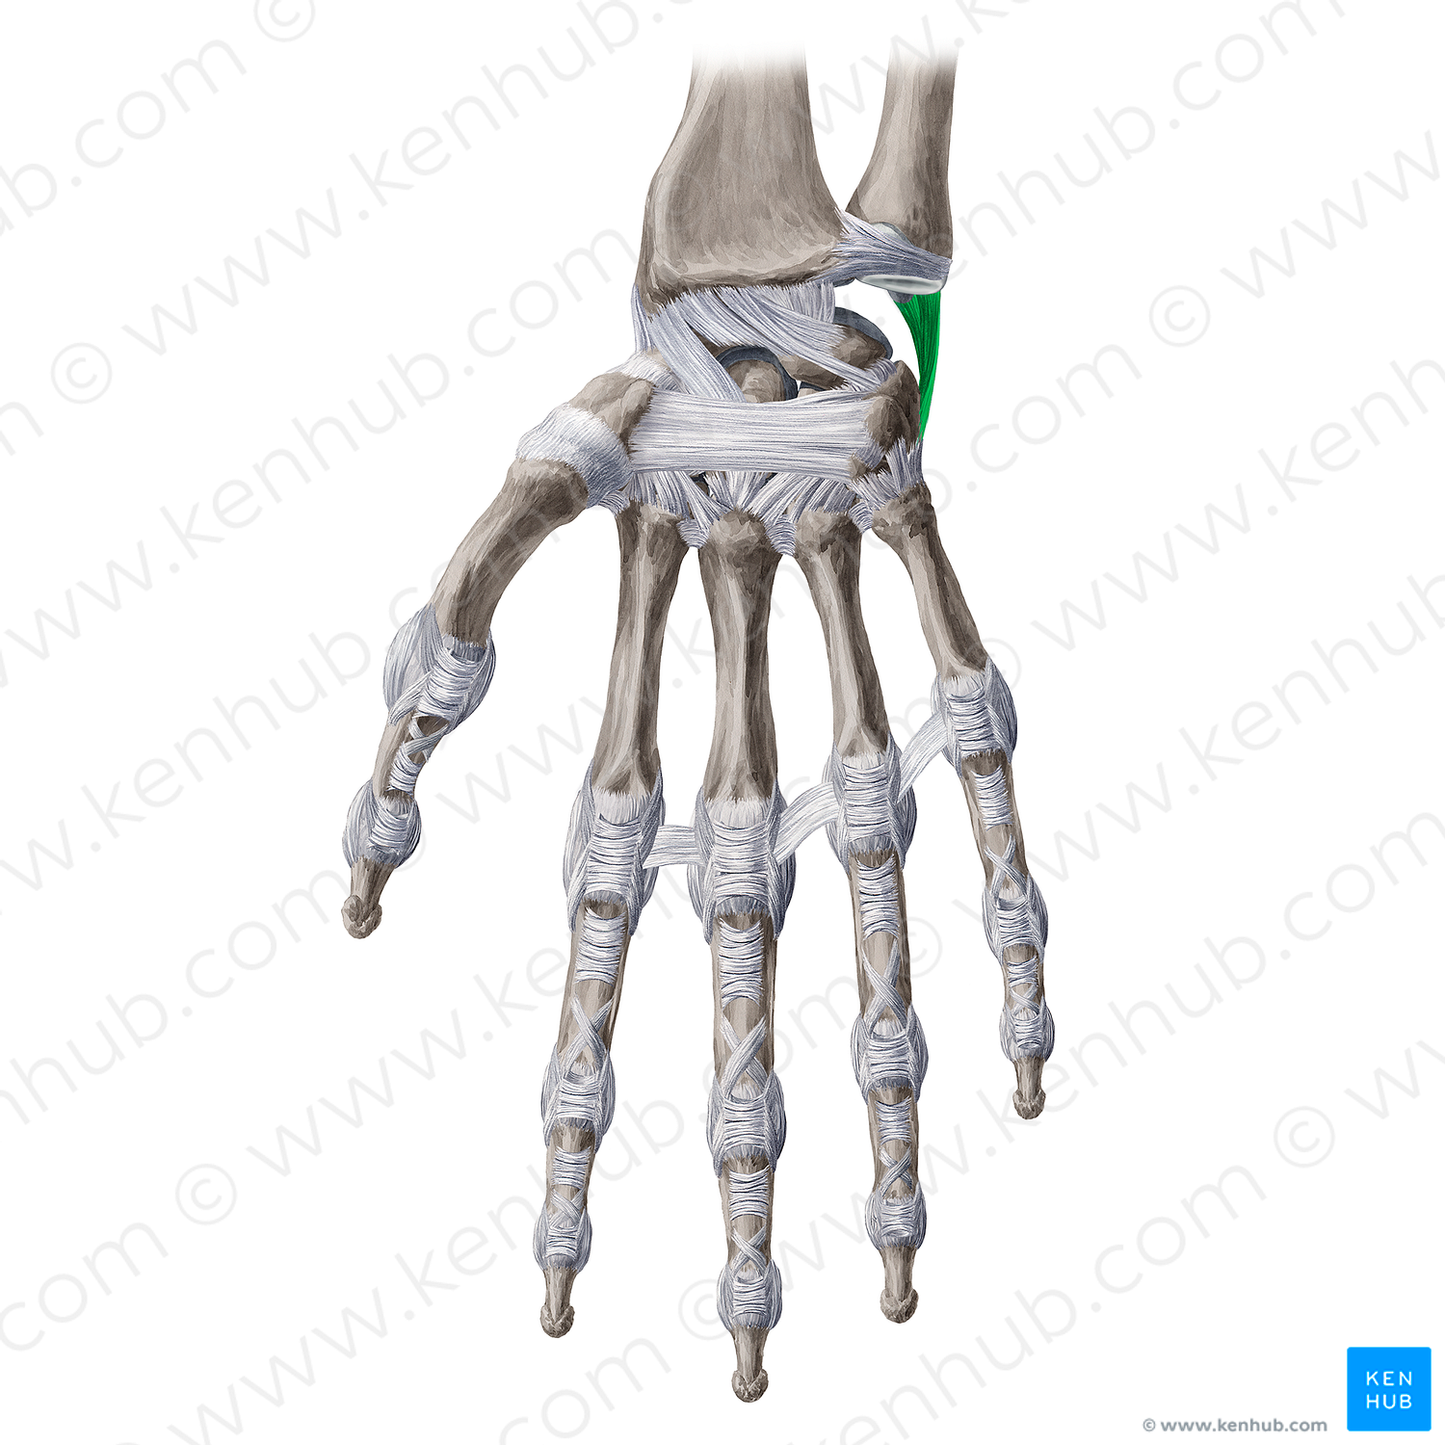 Ulnar collateral ligament of wrist joint (#4486)